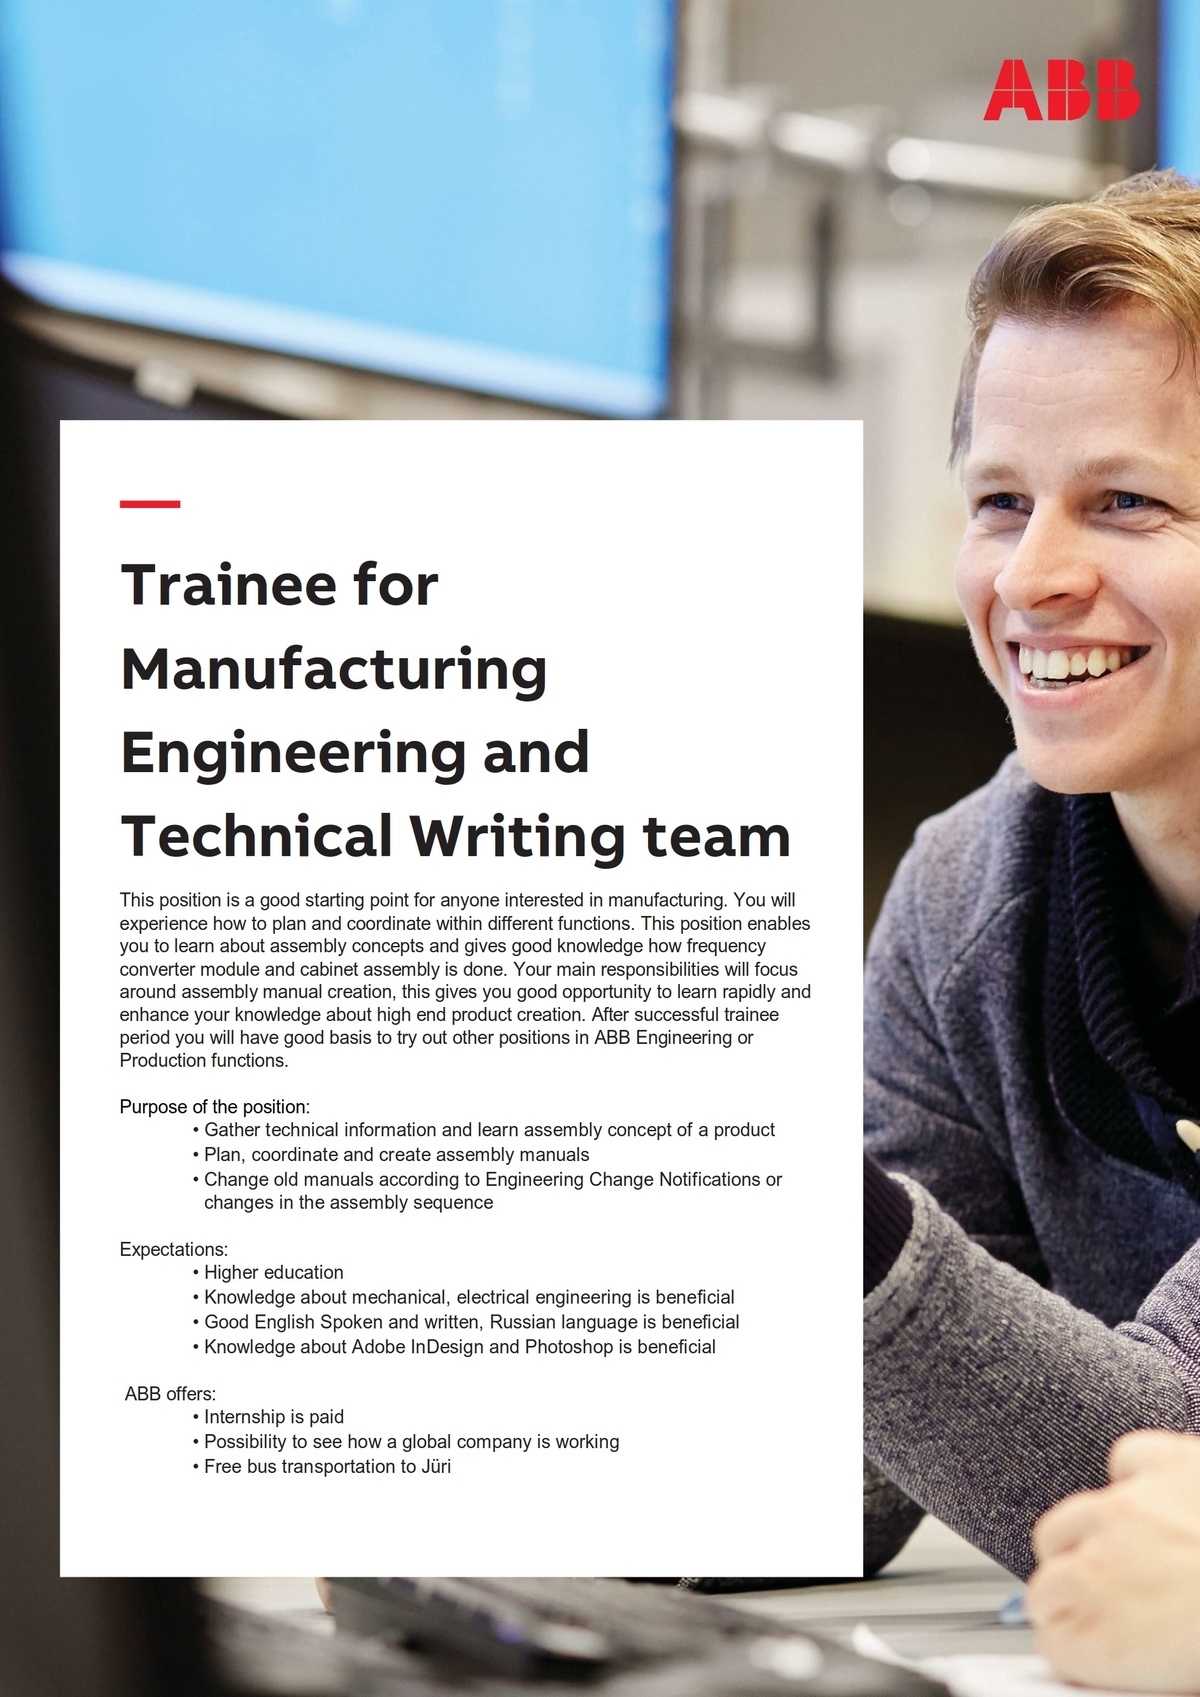 ABB AS Trainee for Manufacturing Engineering and Technical Writing team